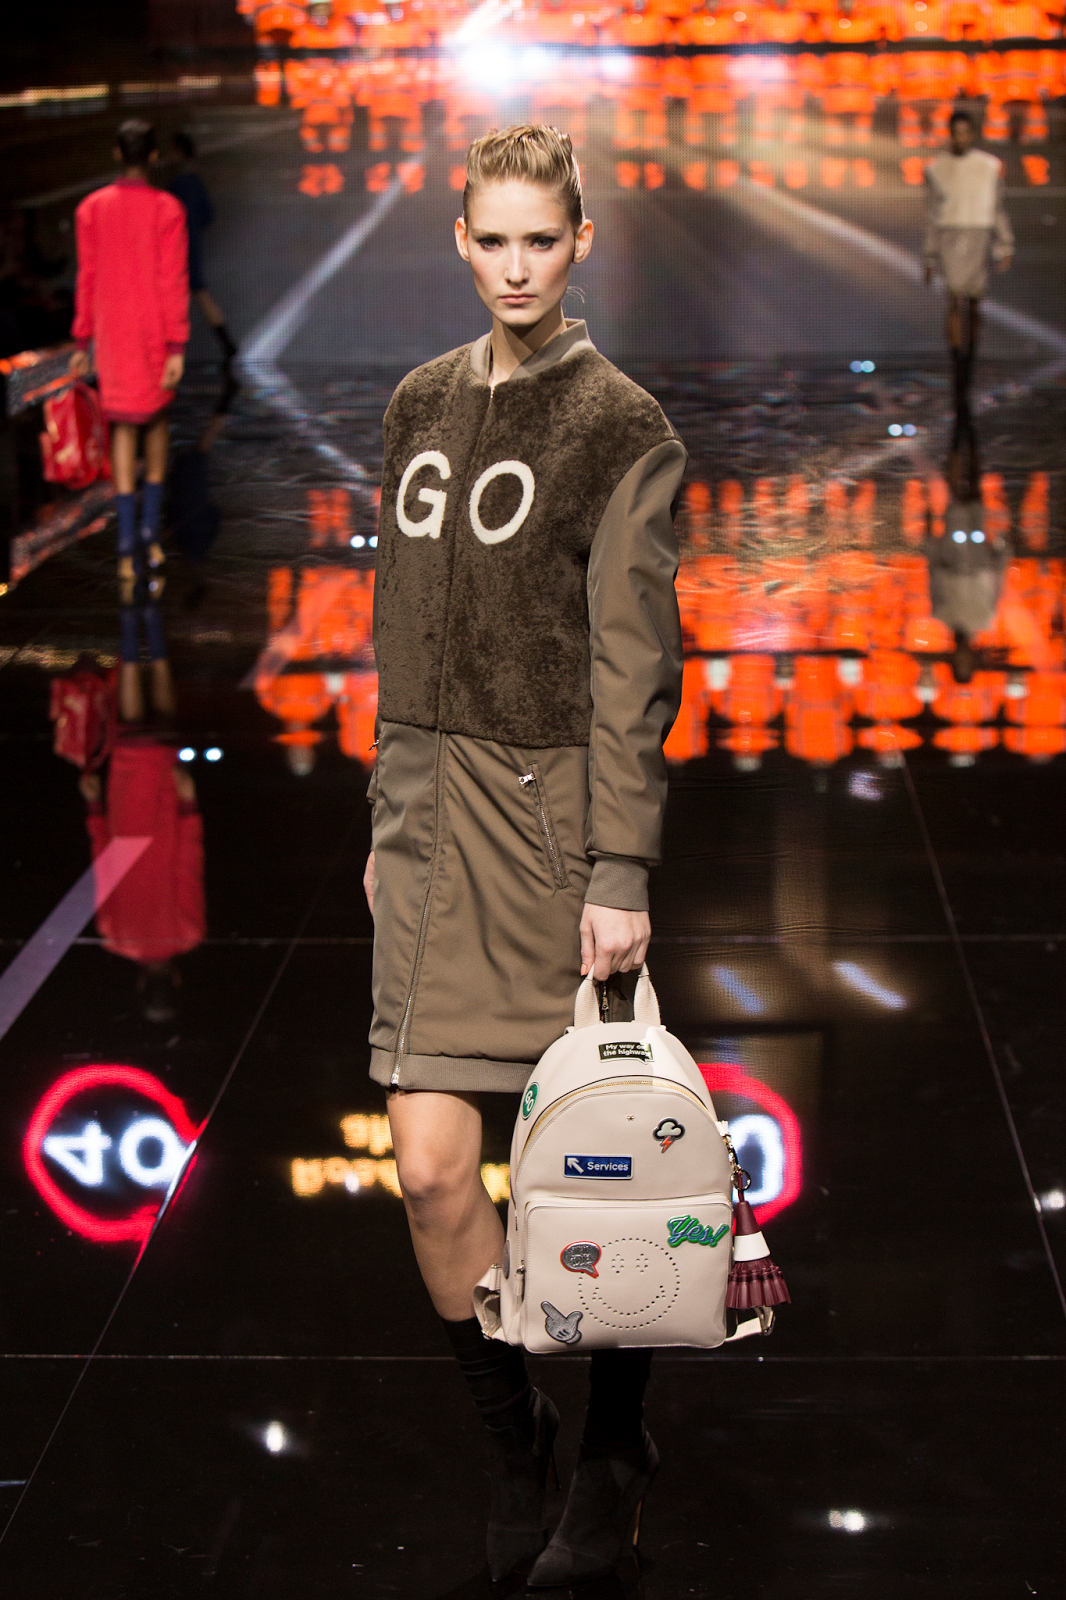 Kee Hua Chee Live!: ANYA HINDMARCH AUTUMN WINTER 2015 COLLECTION 